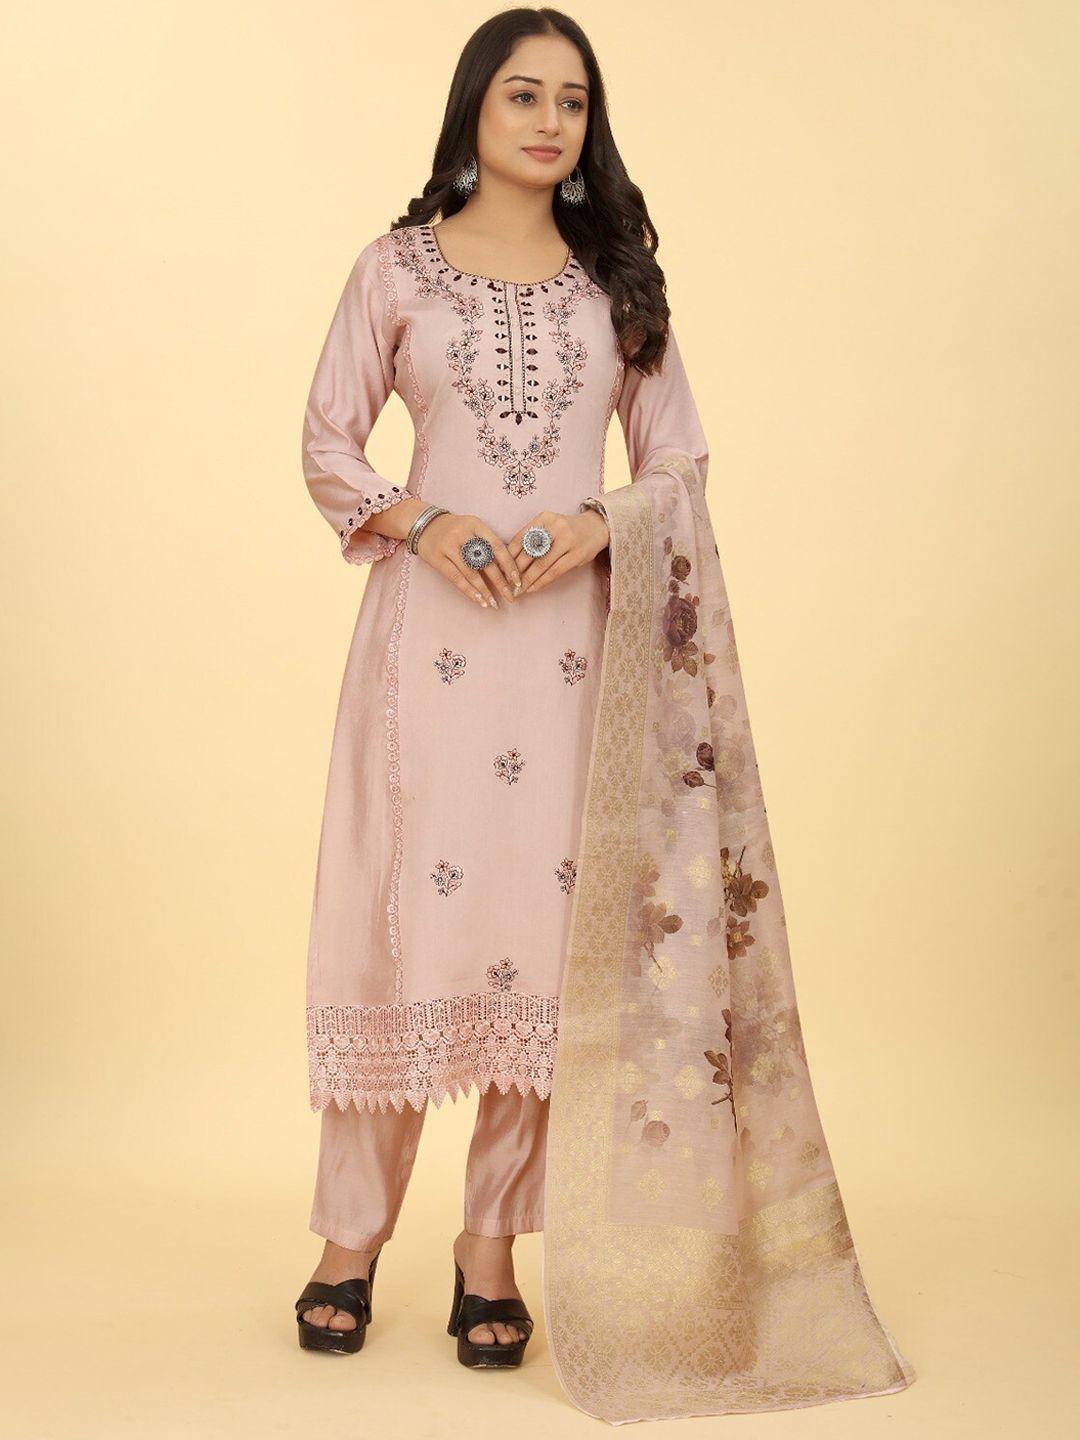 pepperylook floral embroidered mirror work straight kurta with trouser & dupatta